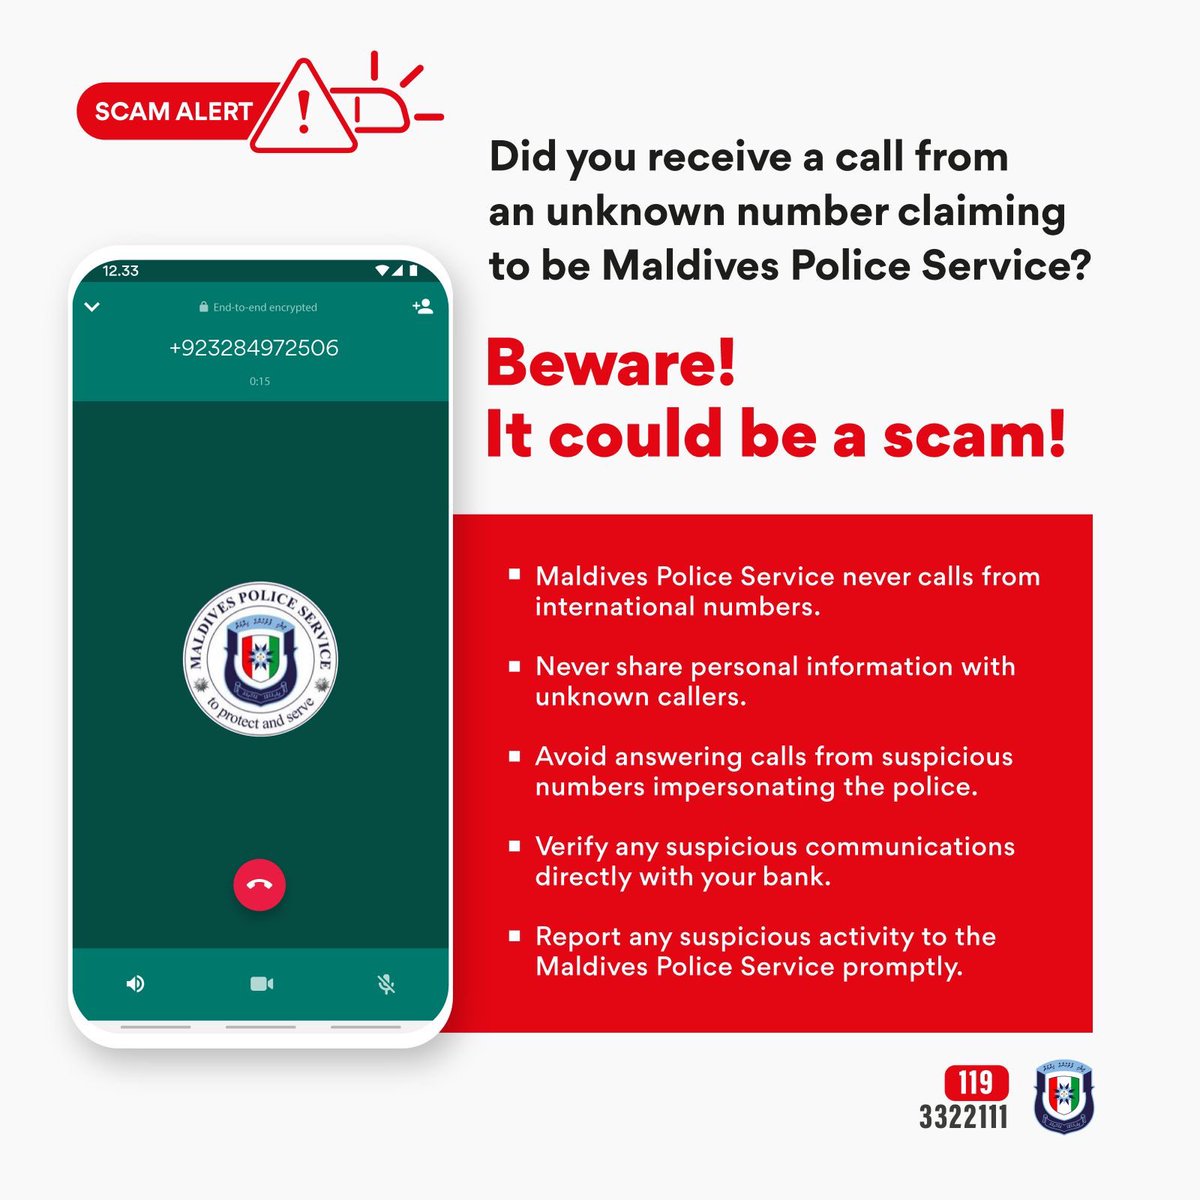 Did you receive a call from an unknown number claiming to be Maldives Police Service? Beware! It could be a scam! #ScamAwareness #StayAlert